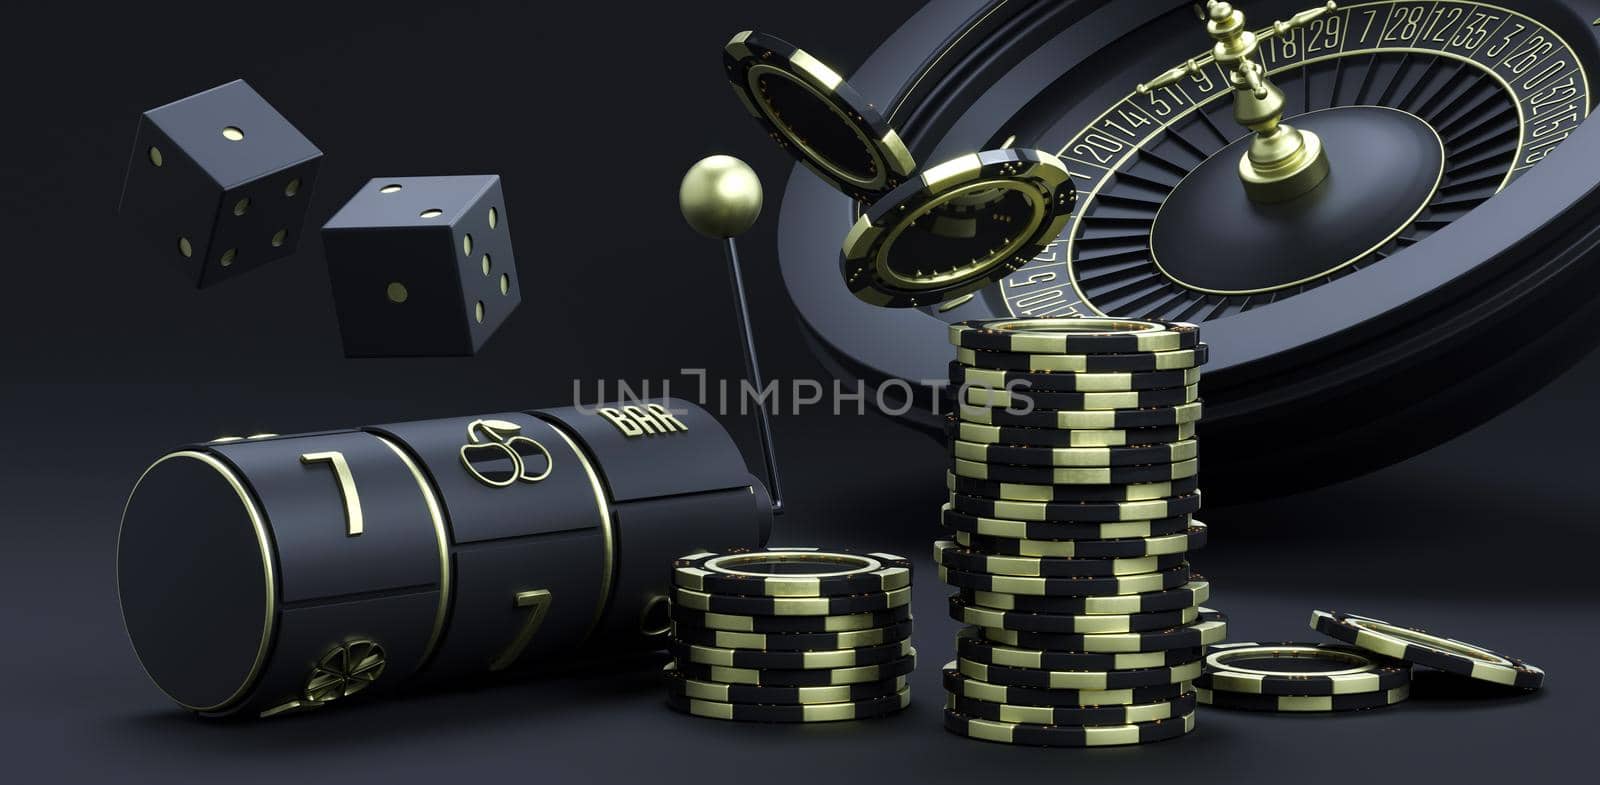 Luxury casino background with roulette wheel poker chips and dice. Online casino dark theme background. Close-up black casino roulette elements. Poker game table. 3d rendering illustration